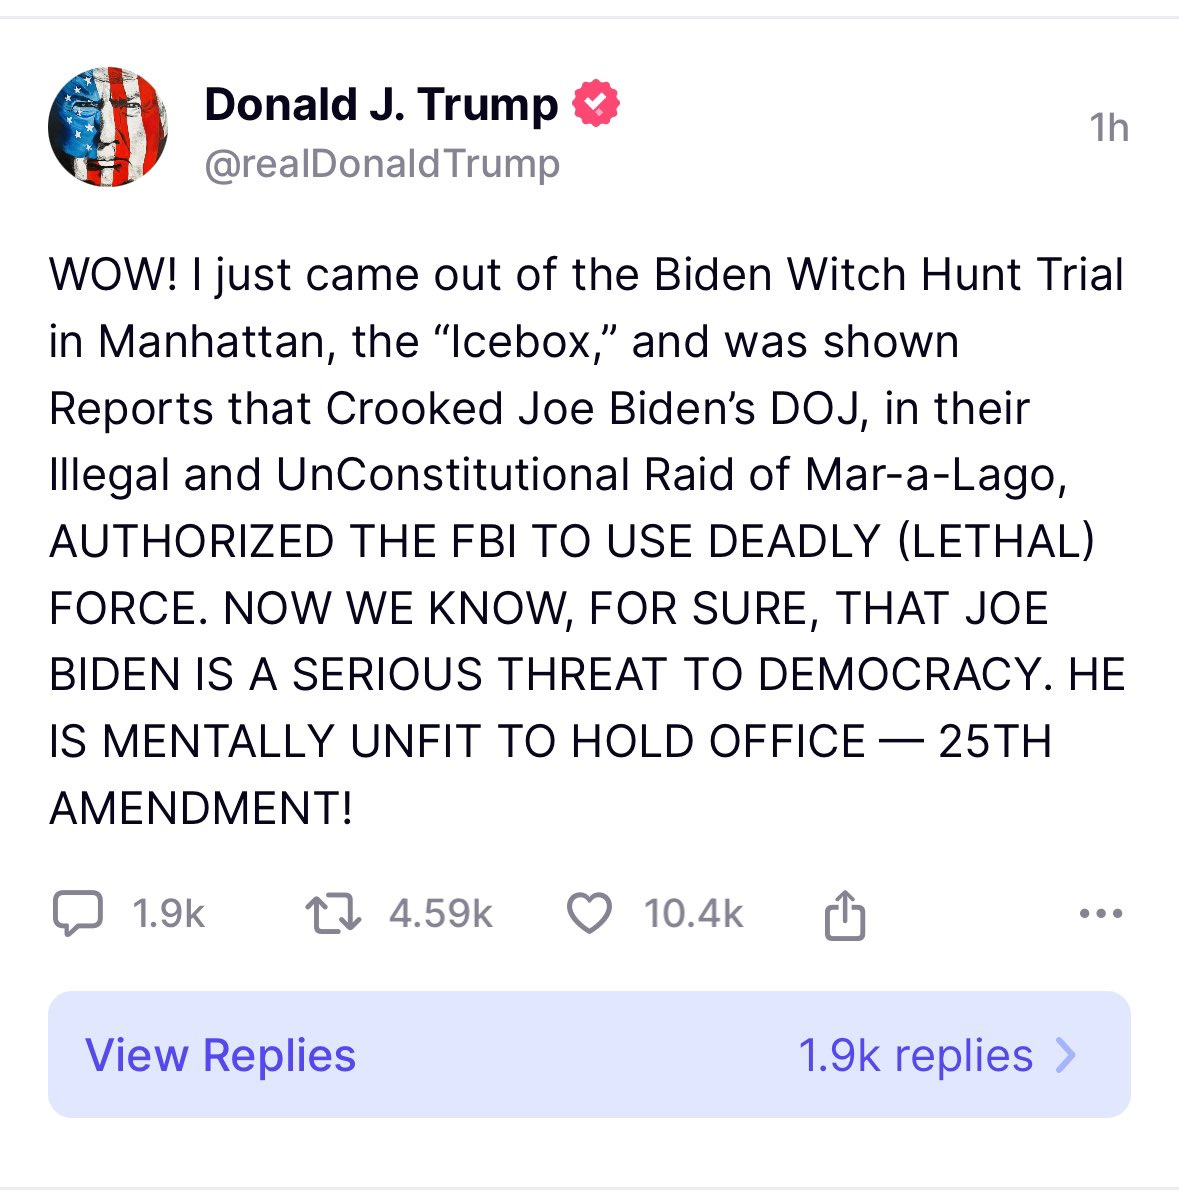 “WOW! I just came out of the Biden Witch Hunt Trial in Manhattan, the “Icebox,” and was shown Reports that Crooked Joe Biden’s DOJ, in their Illegal and UnConstitutional Raid of Mar-a-Lago, AUTHORIZED THE FBI TO USE DEADLY (LETHAL) FORCE. NOW WE KNOW, FOR SURE, THAT JOE BIDEN IS A SERIOUS THREAT TO DEMOCRACY. HE IS MENTALLY UNFIT TO HOLD OFFICE — 25TH AMENDMENT!”